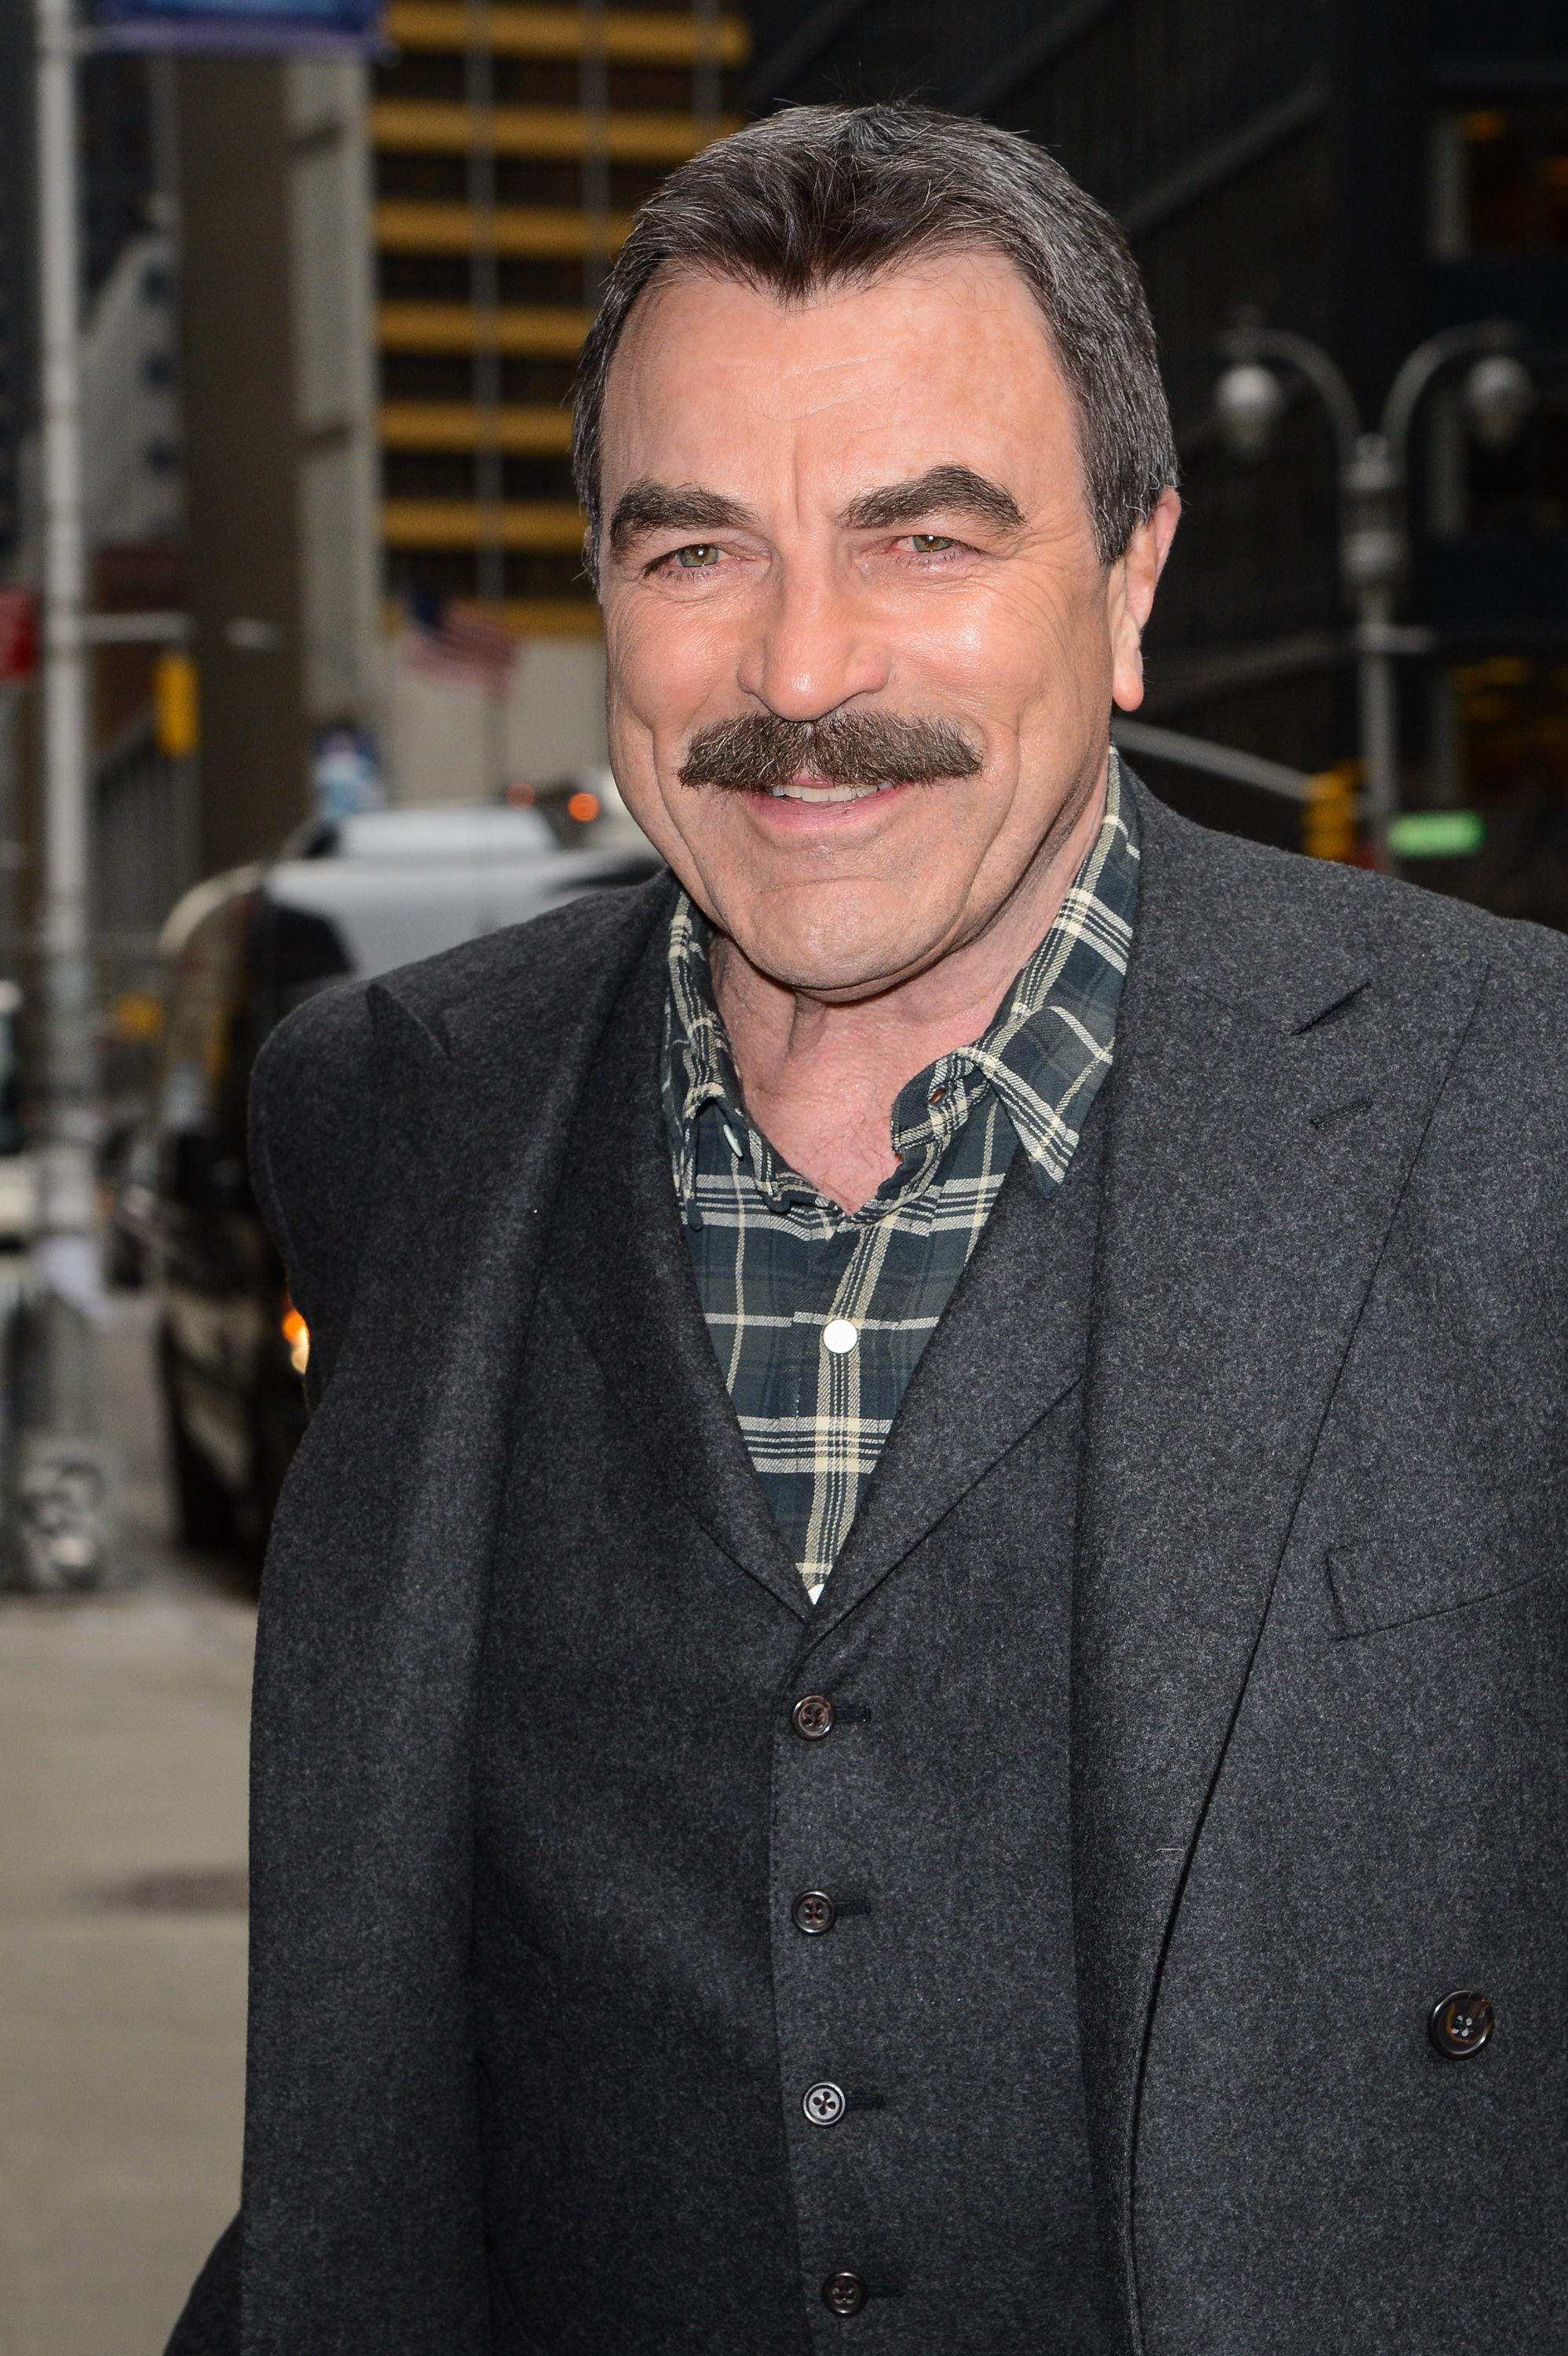 Tom Selleck enters the "Late Show With David Letterman" taping at the Ed Sullivan Theater on March 5, 2014, in New York City | Source: Getty Images